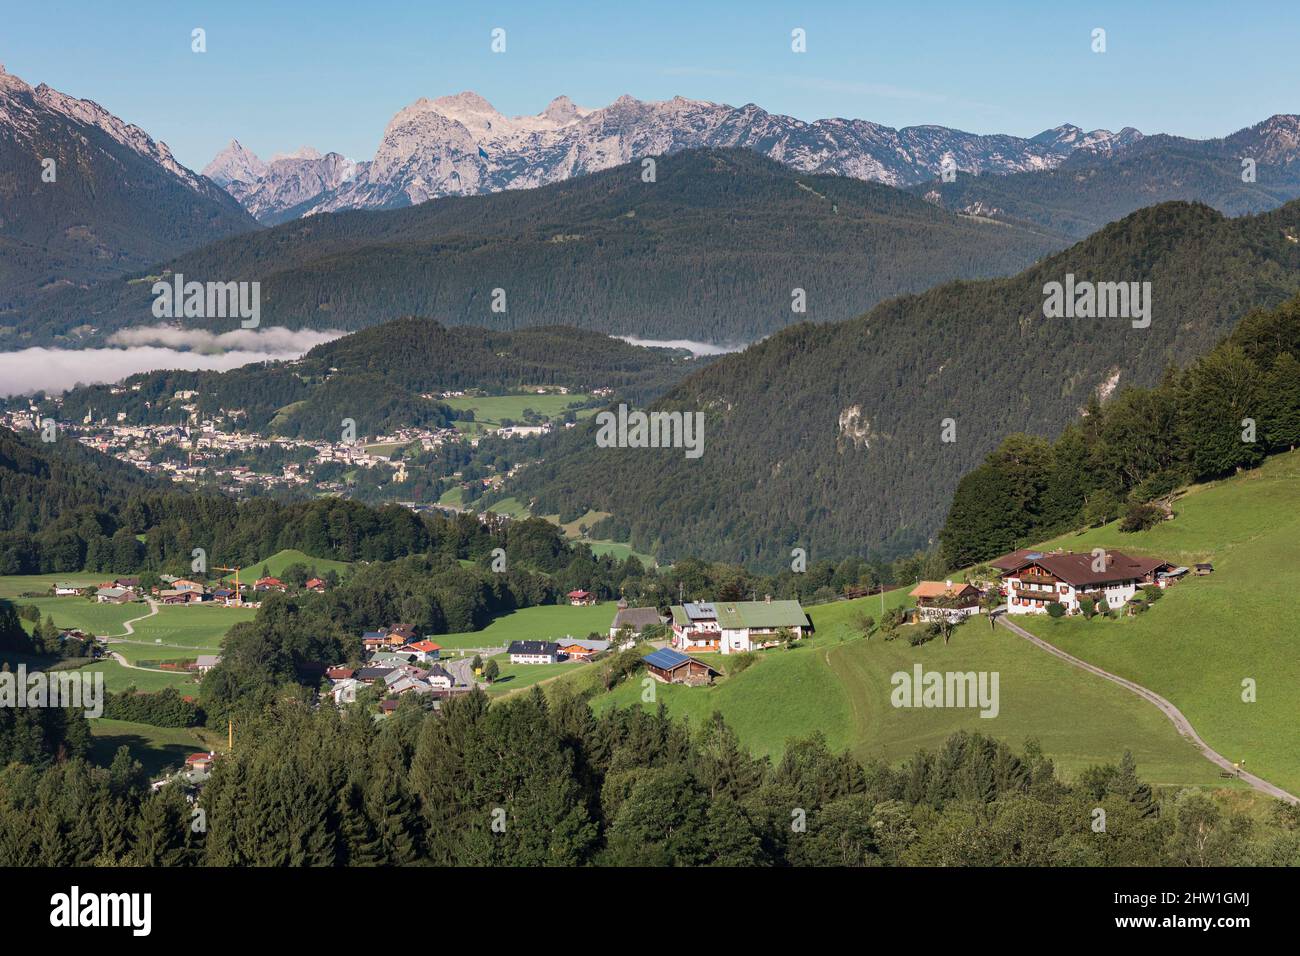 Germany, Bavaria, Upper Bavaria, Obersalzberg, alpine landscape, chalets, forest and rocky ridges under the morning sun, mist over the village of Oberau down in the valley Stock Photo